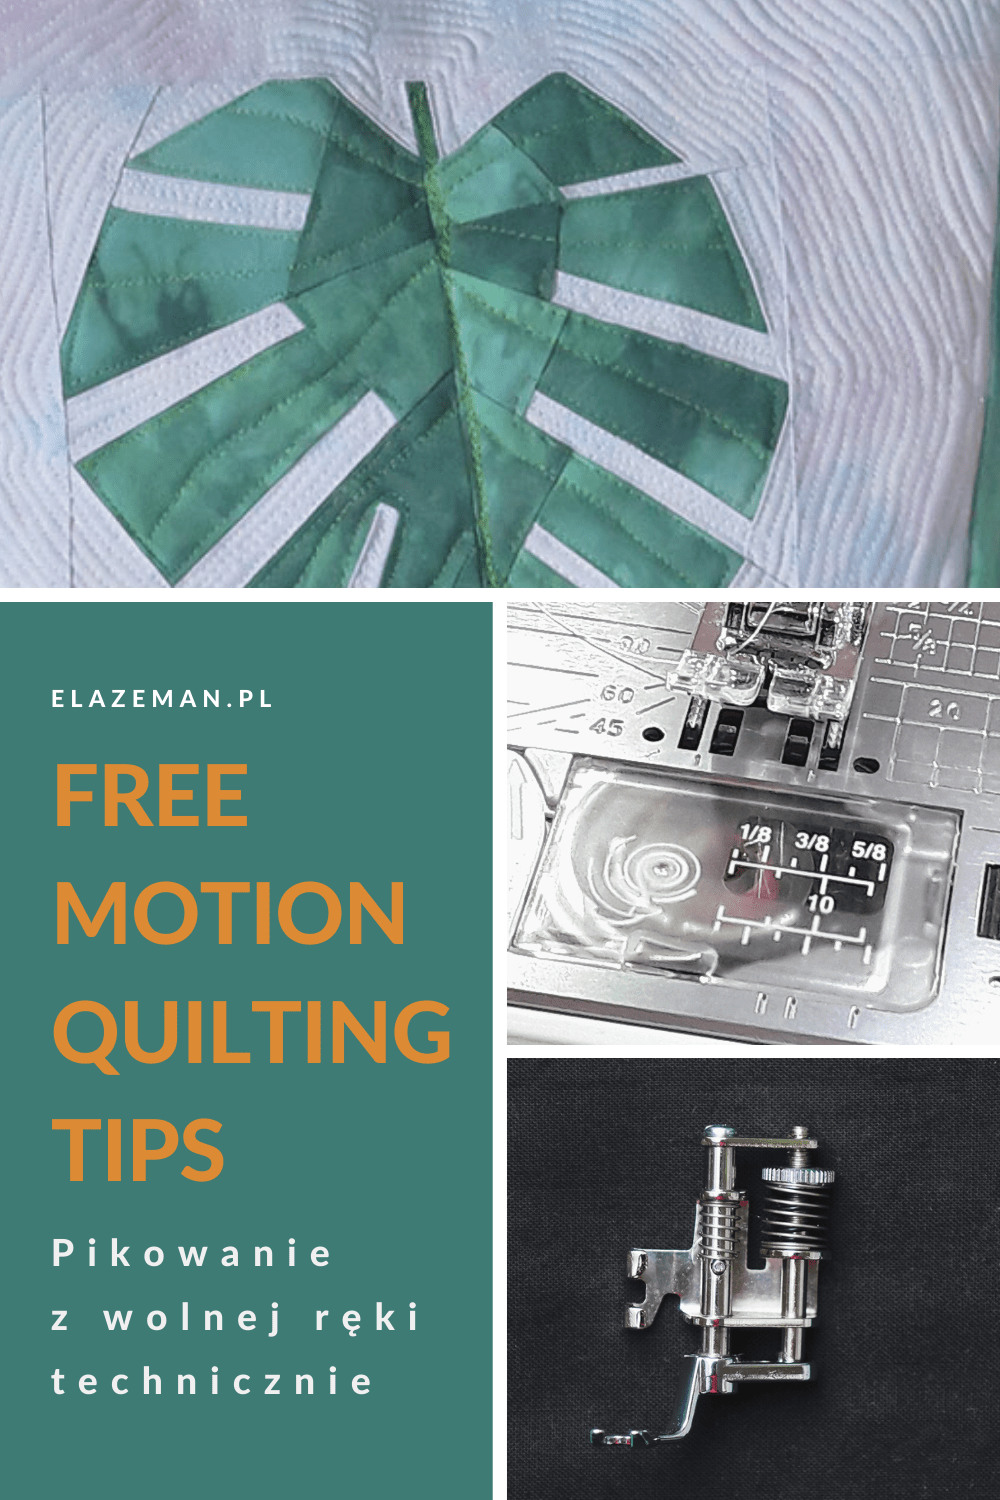 Quilting Tips